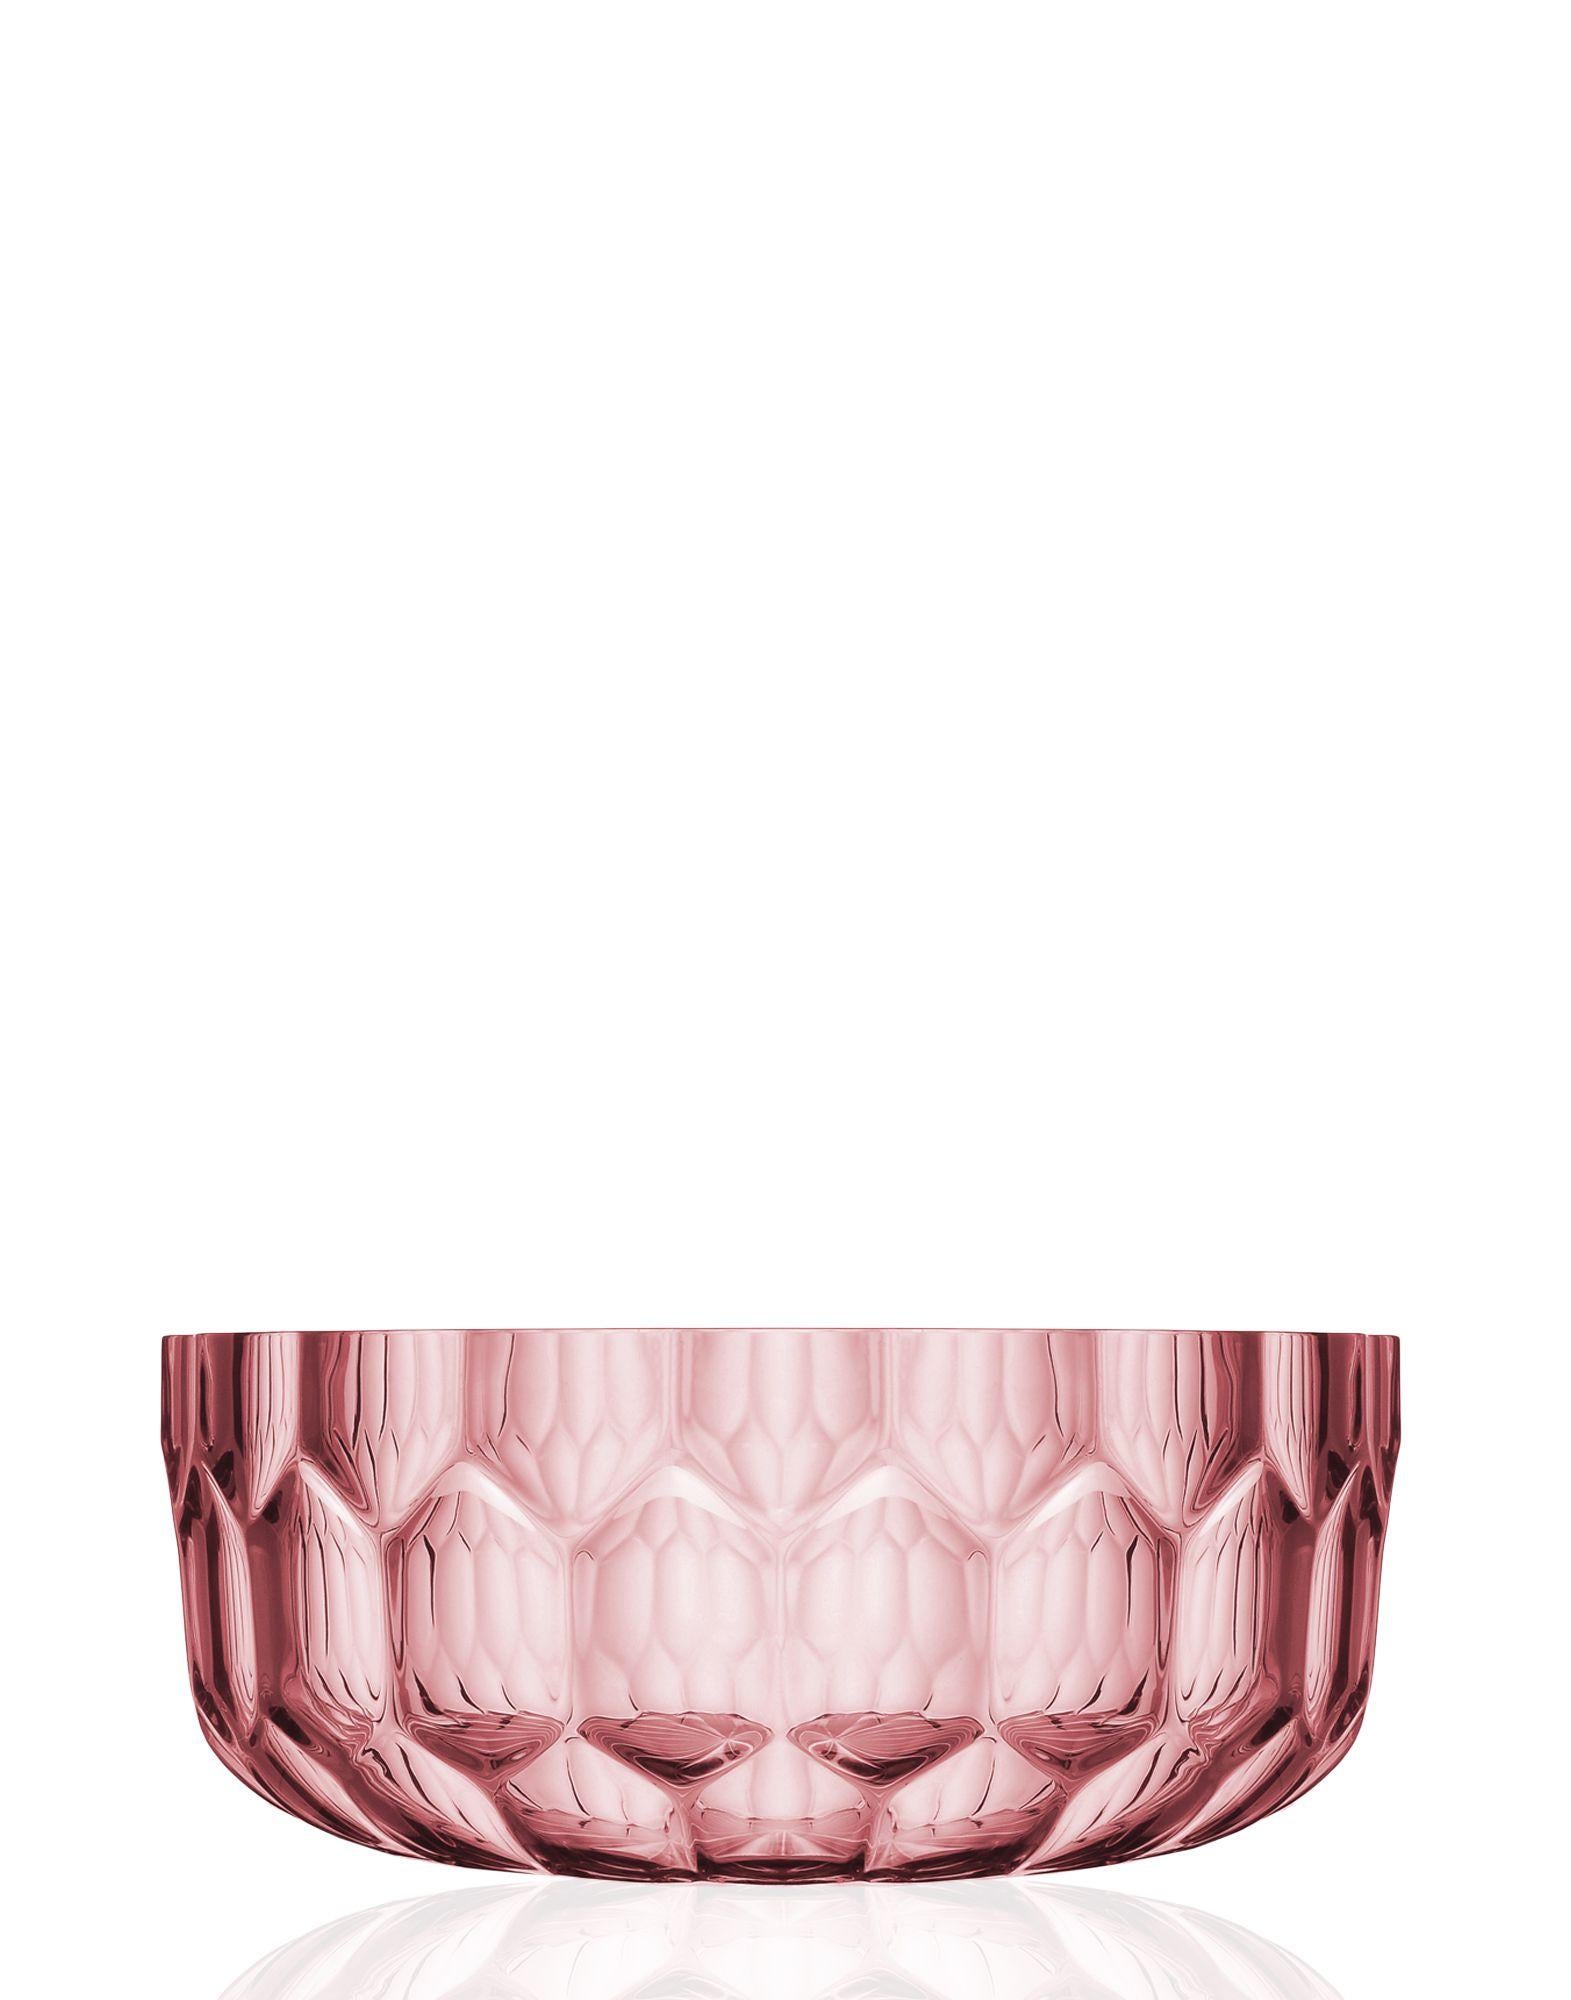 Kartell Jellies Basket in Crystal by Patricia Urquiola For Sale 8